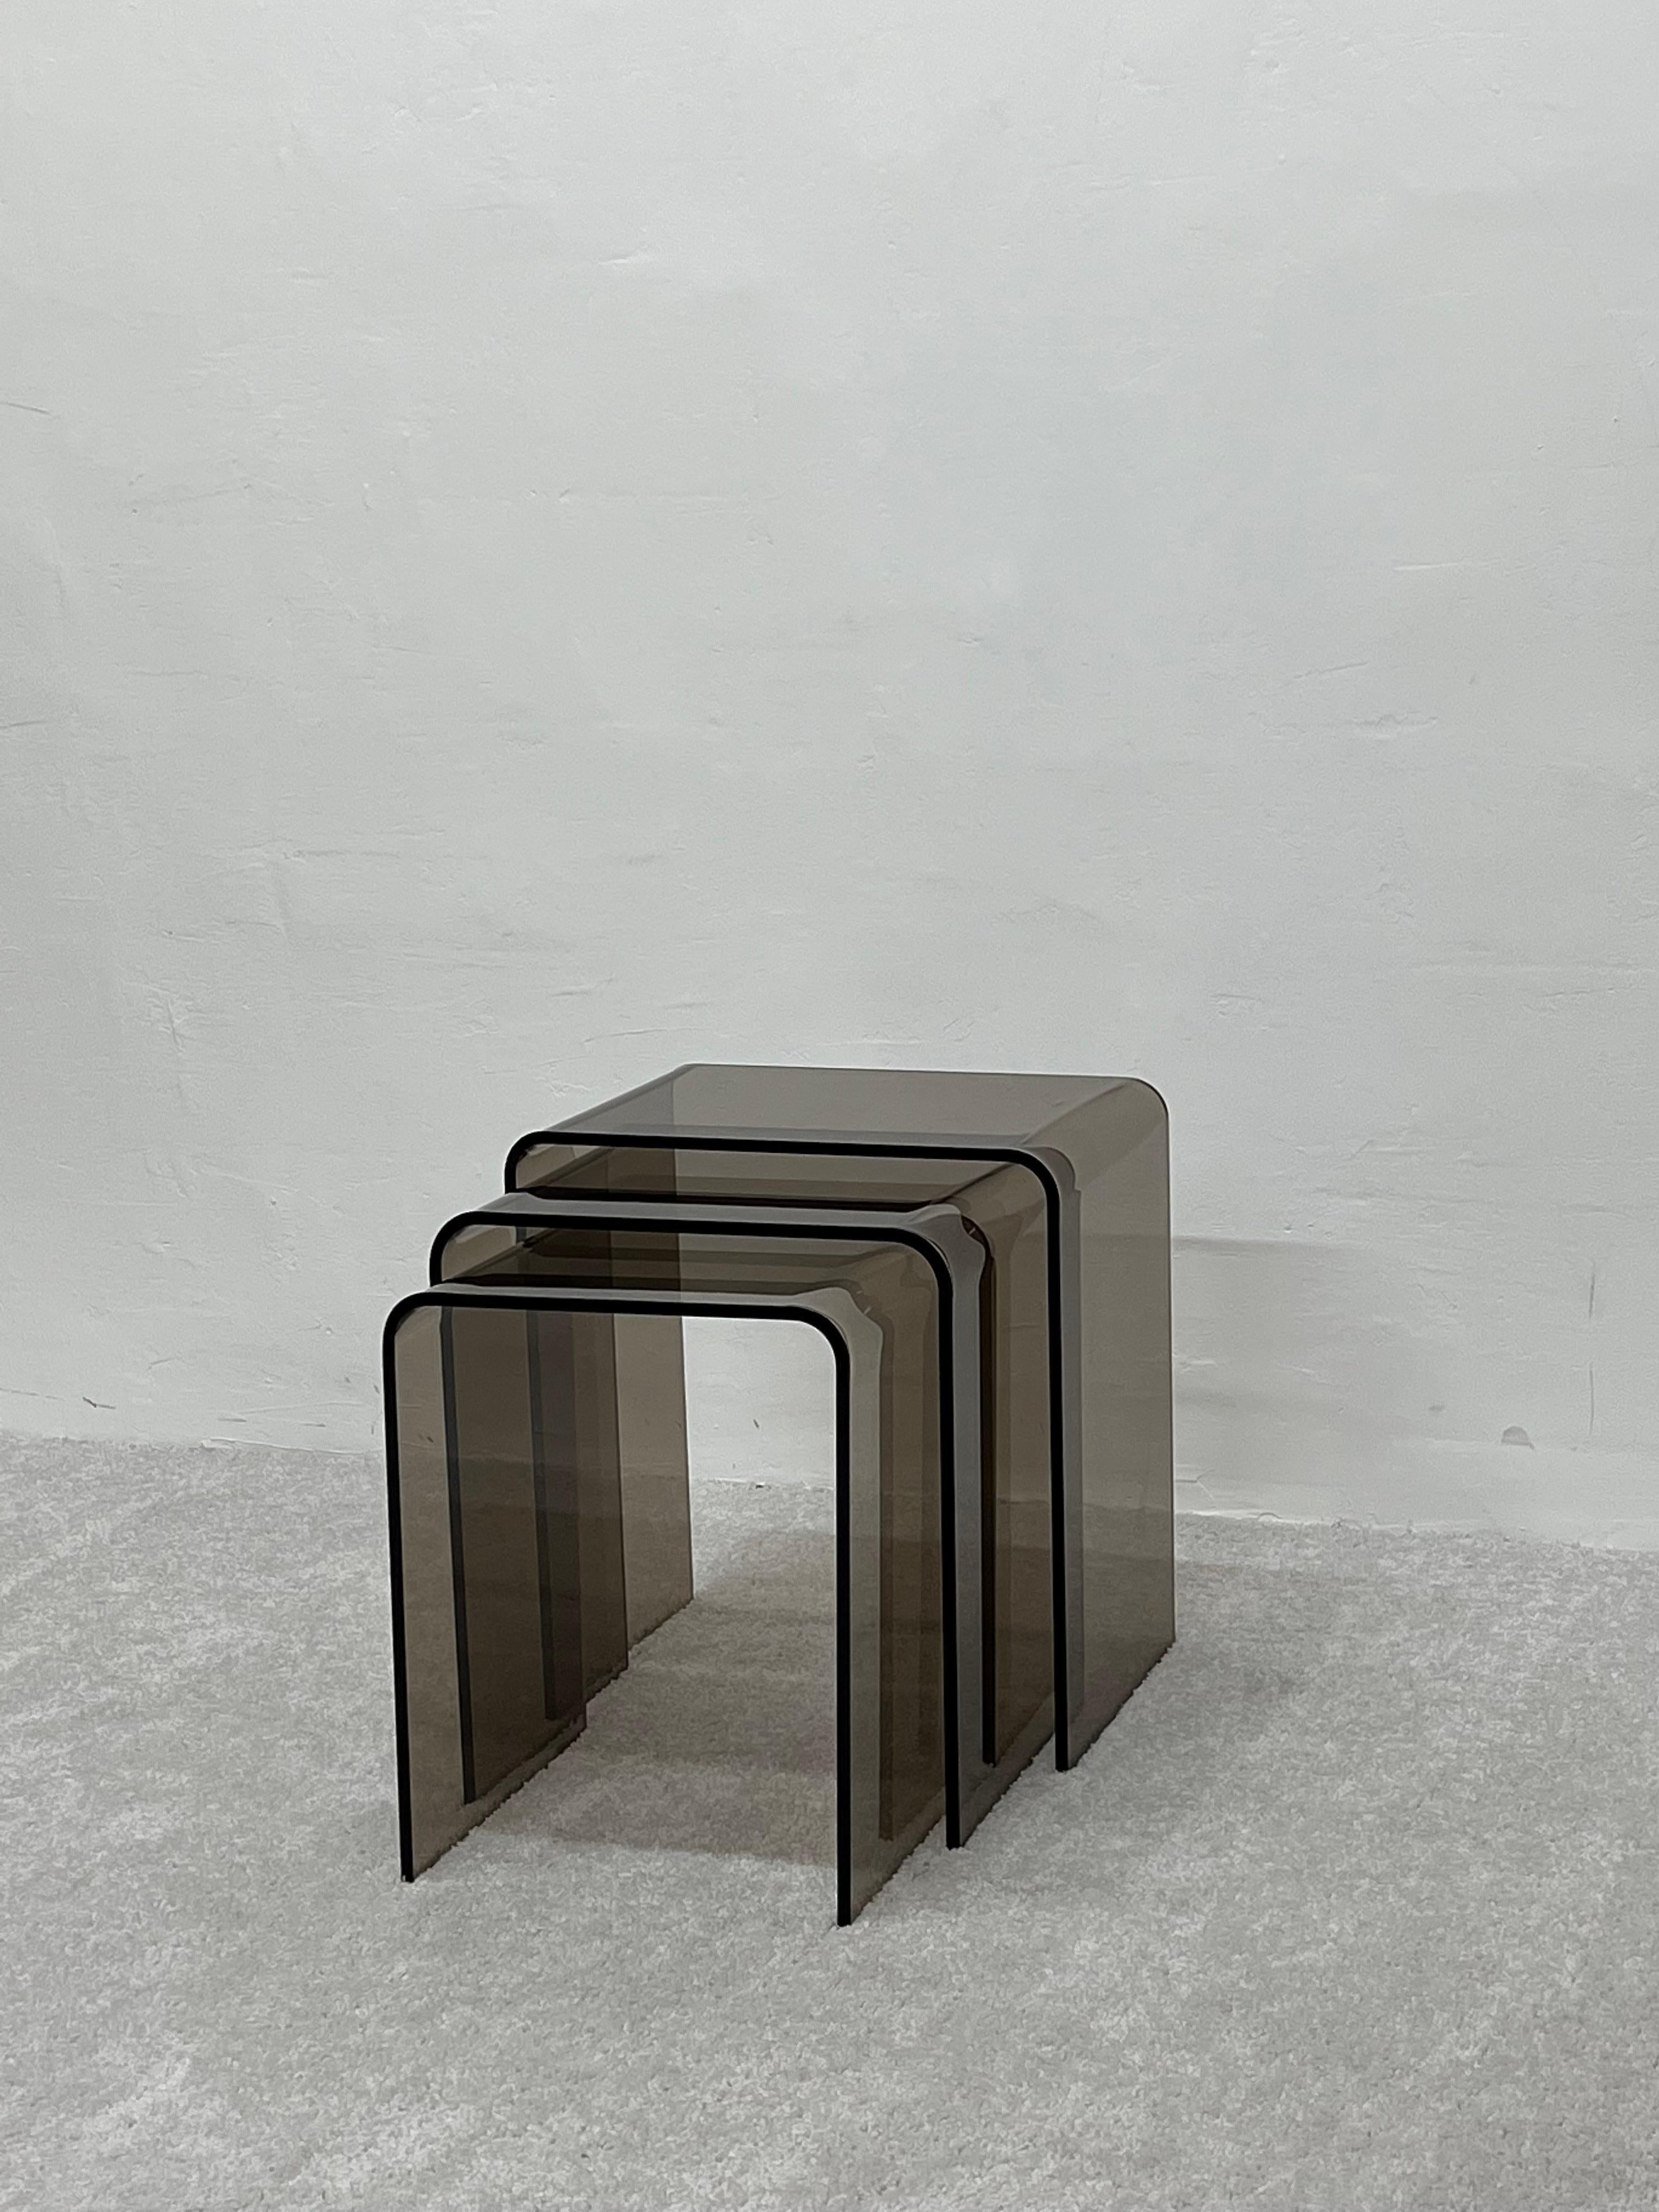 Set of three smoked brown lucite nesting tables from the 1960s.

Dimensions:
Large - W16-3/4